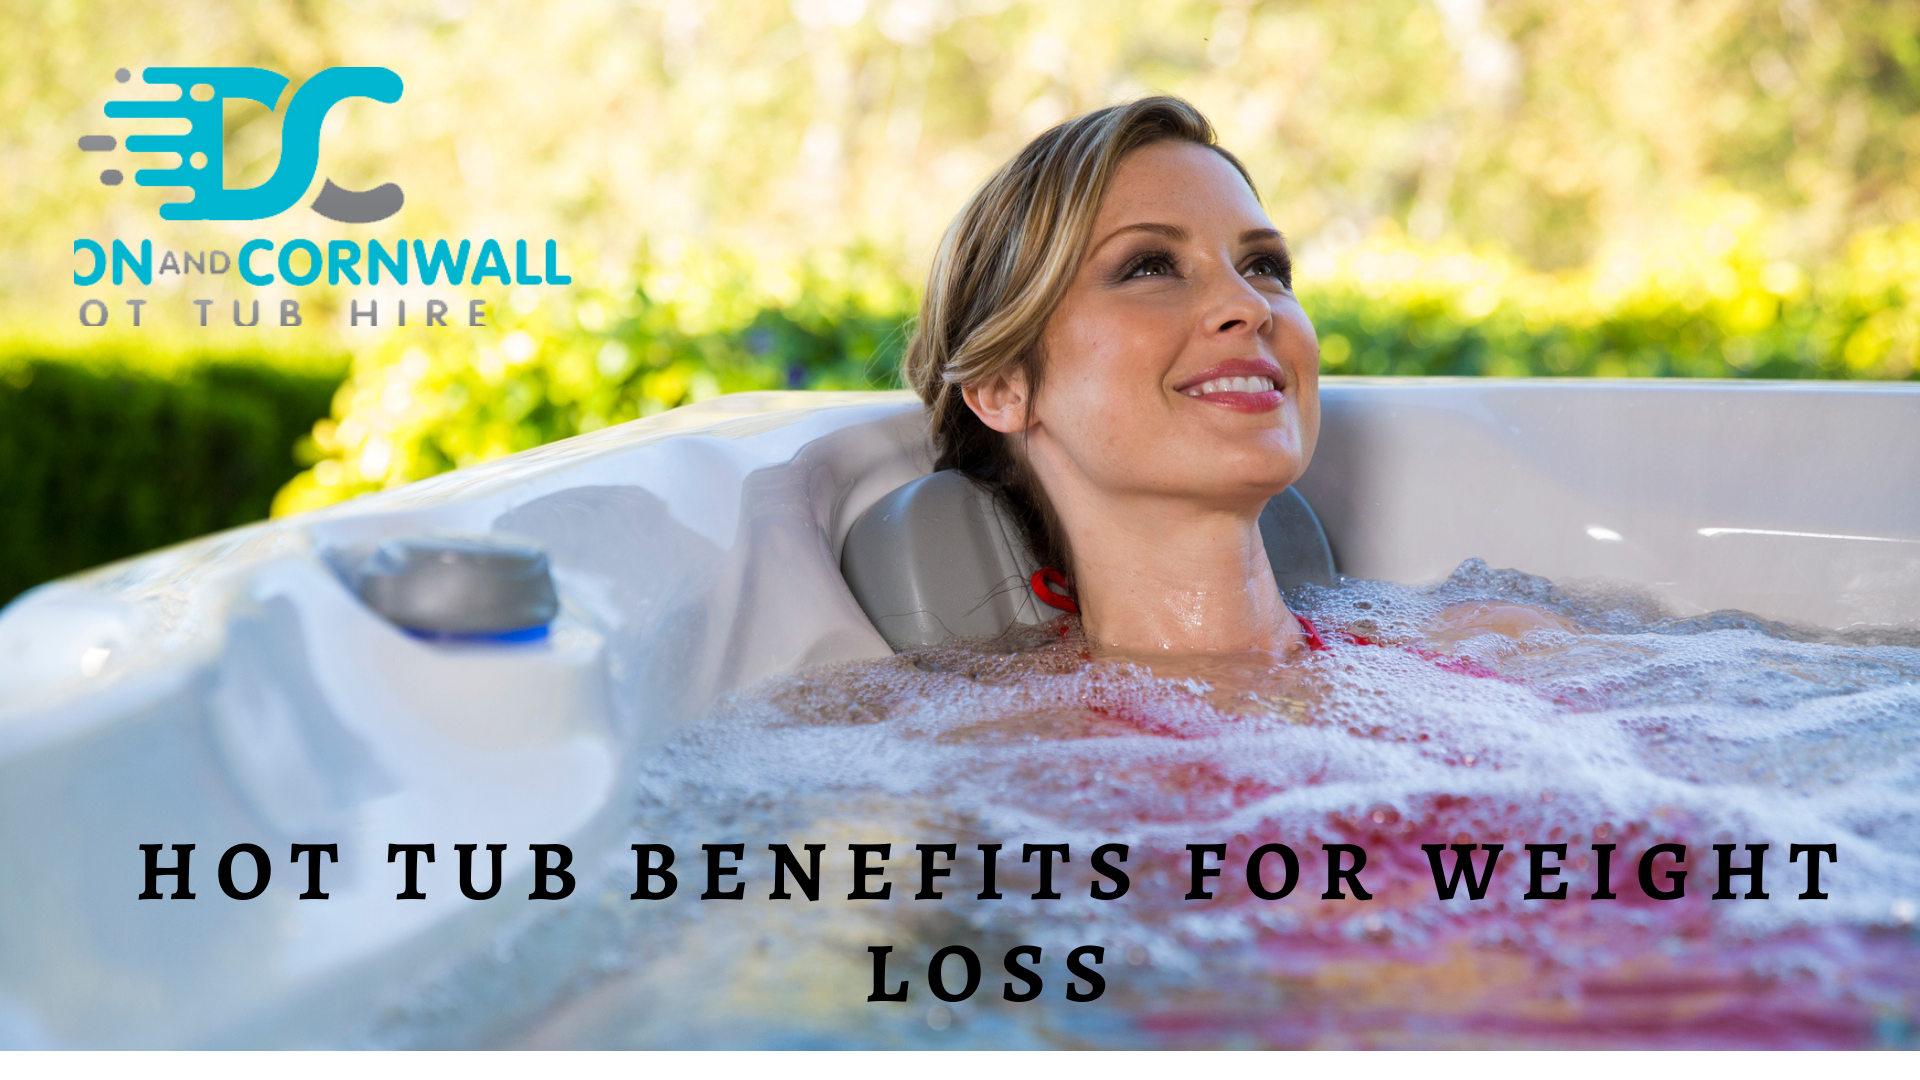 Hot tub weight loss benefite